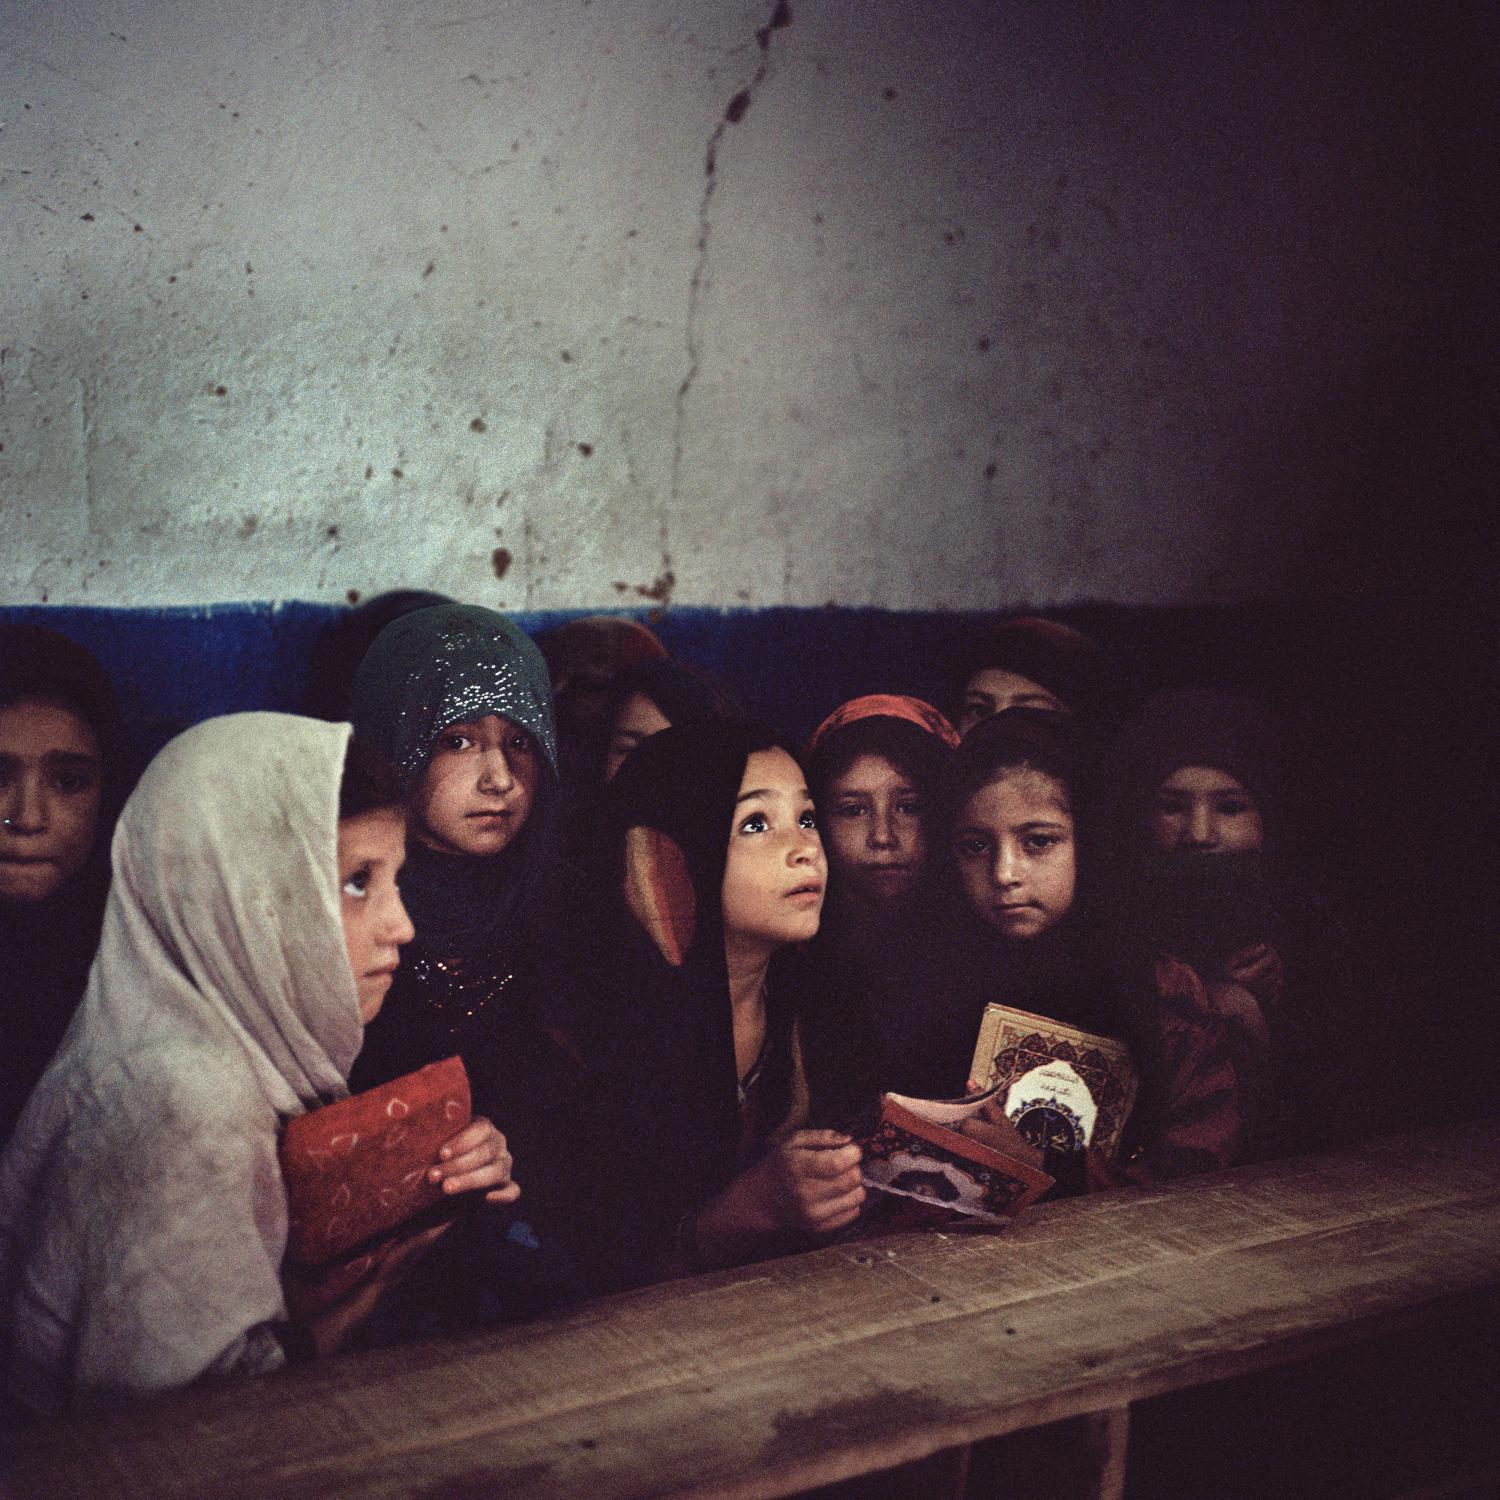 Single images - Girls at an Afghan refugee settlement on the outskirts of...